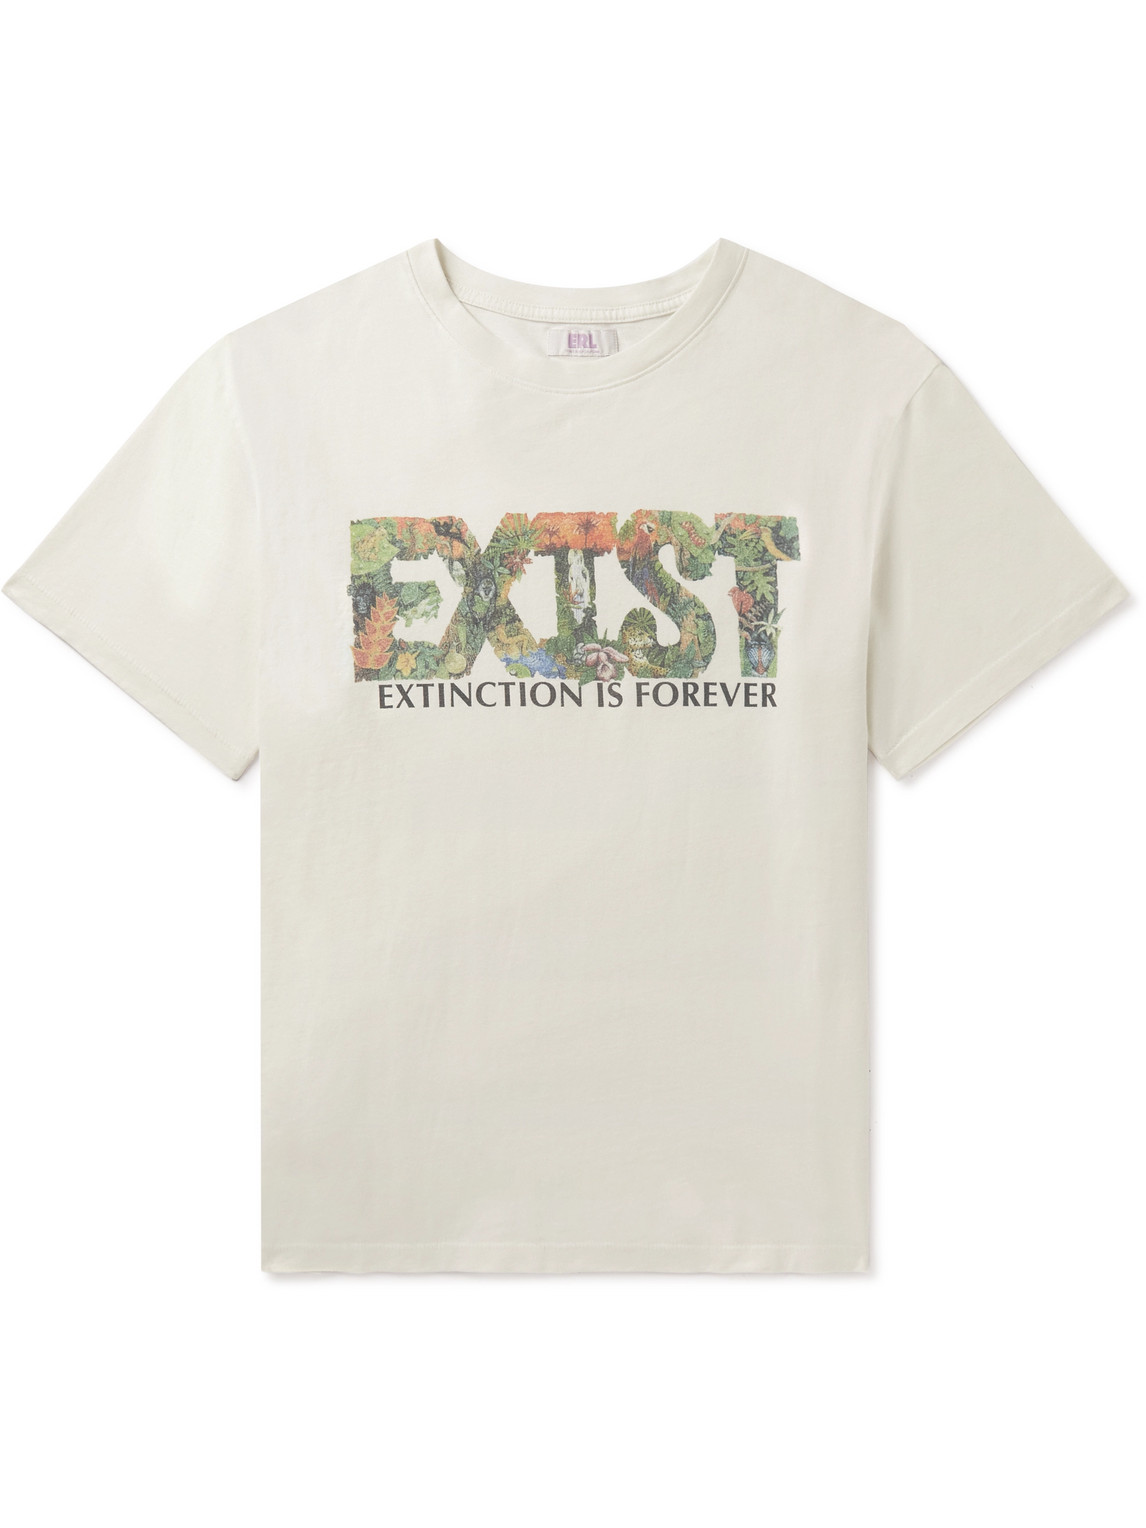 ERL Printed Cotton-Jersey T-Shirt